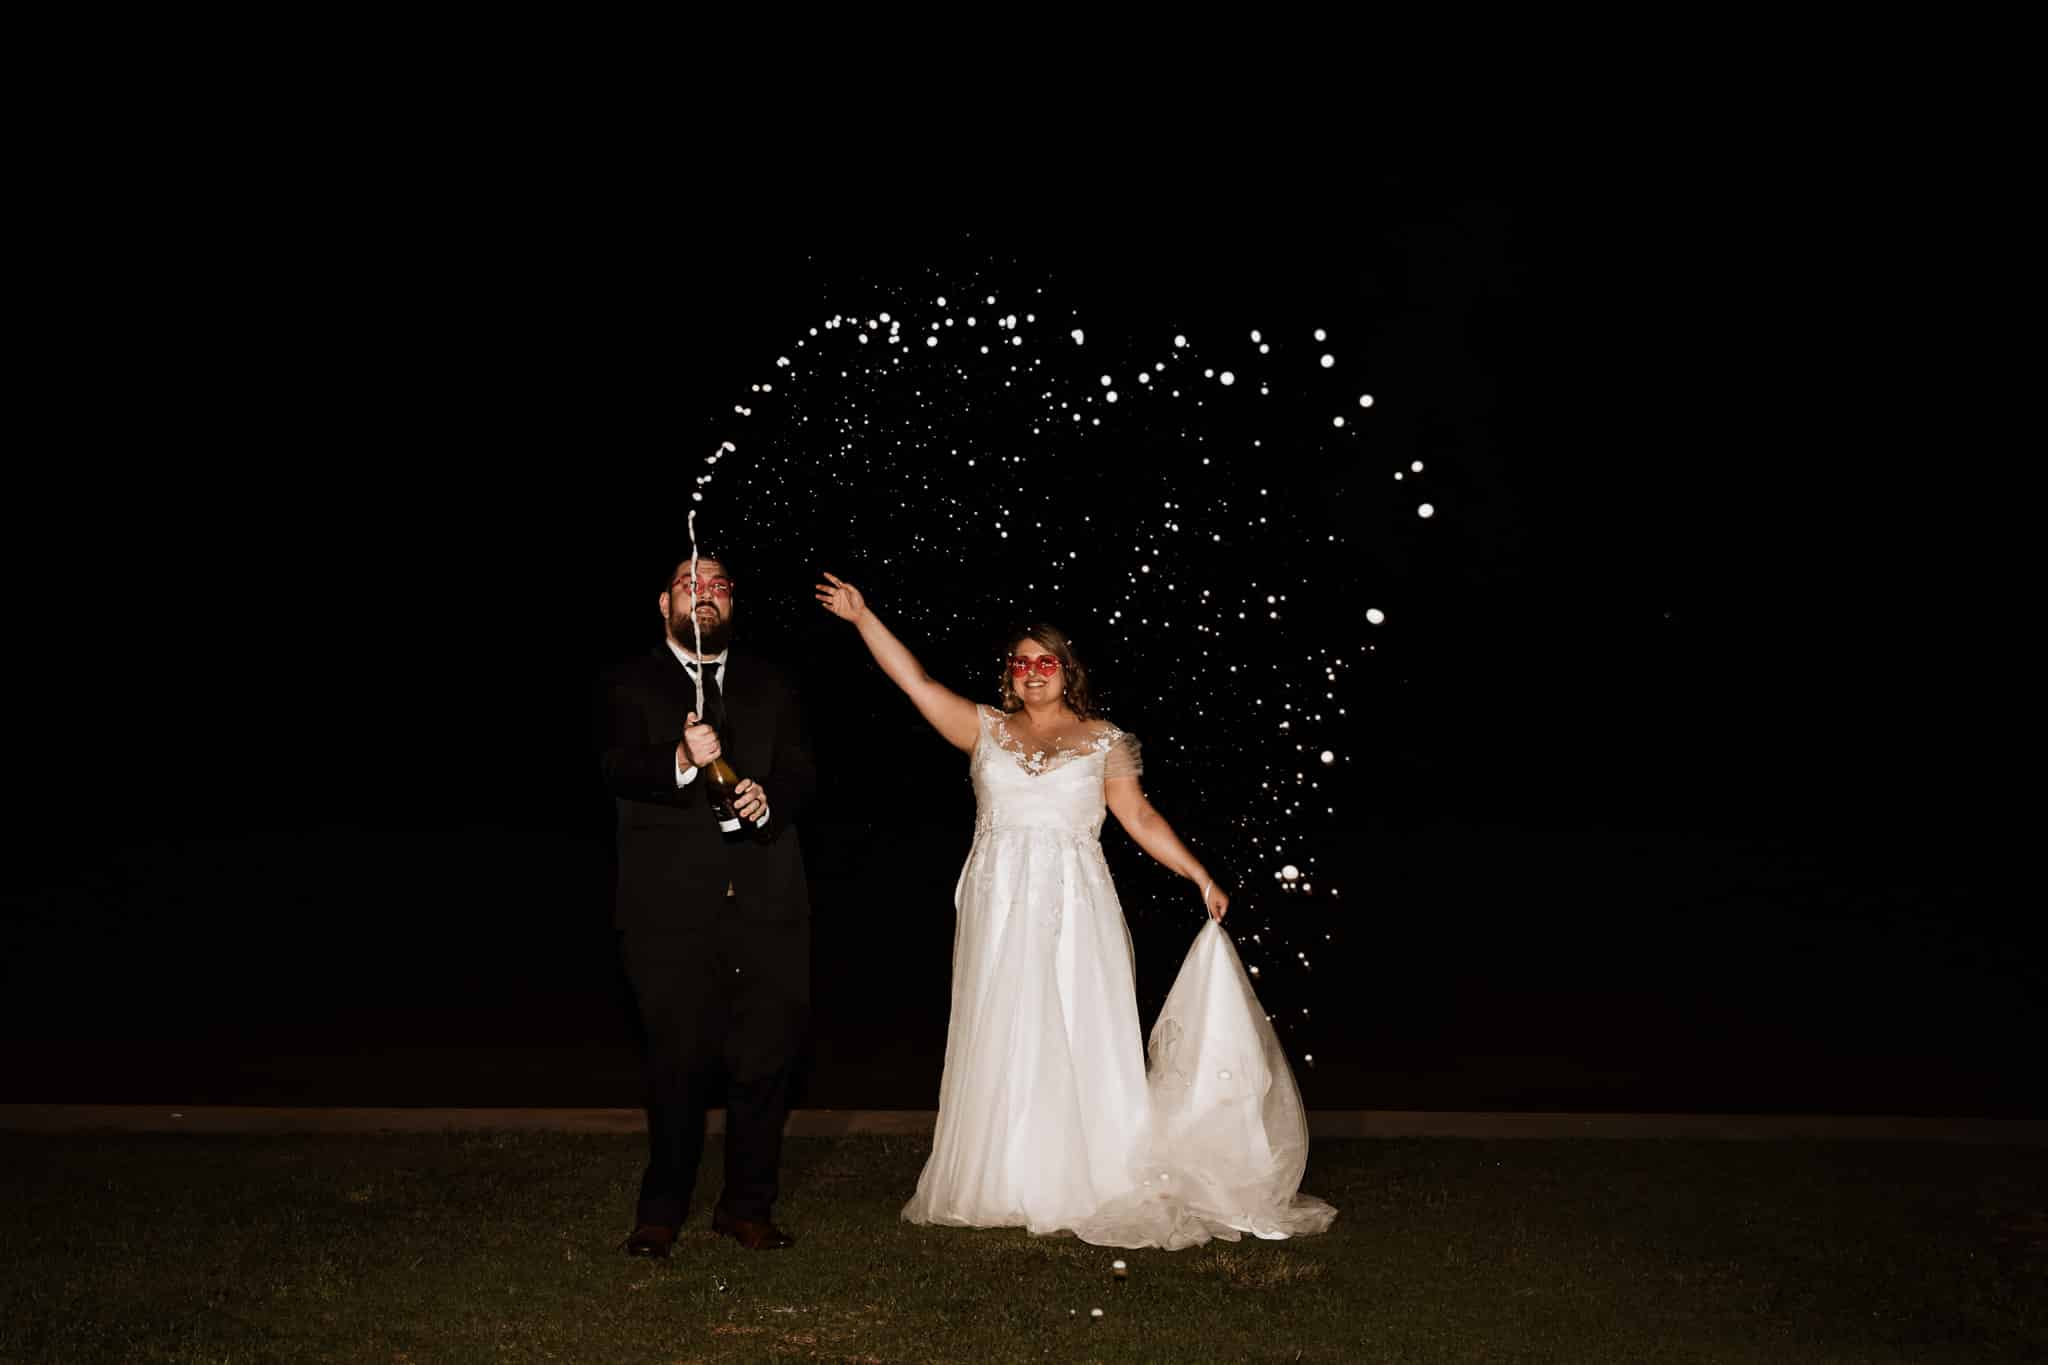 Real Life Brides | A modern wedding for bride Mandy and groom Drew which is just like a fun party.